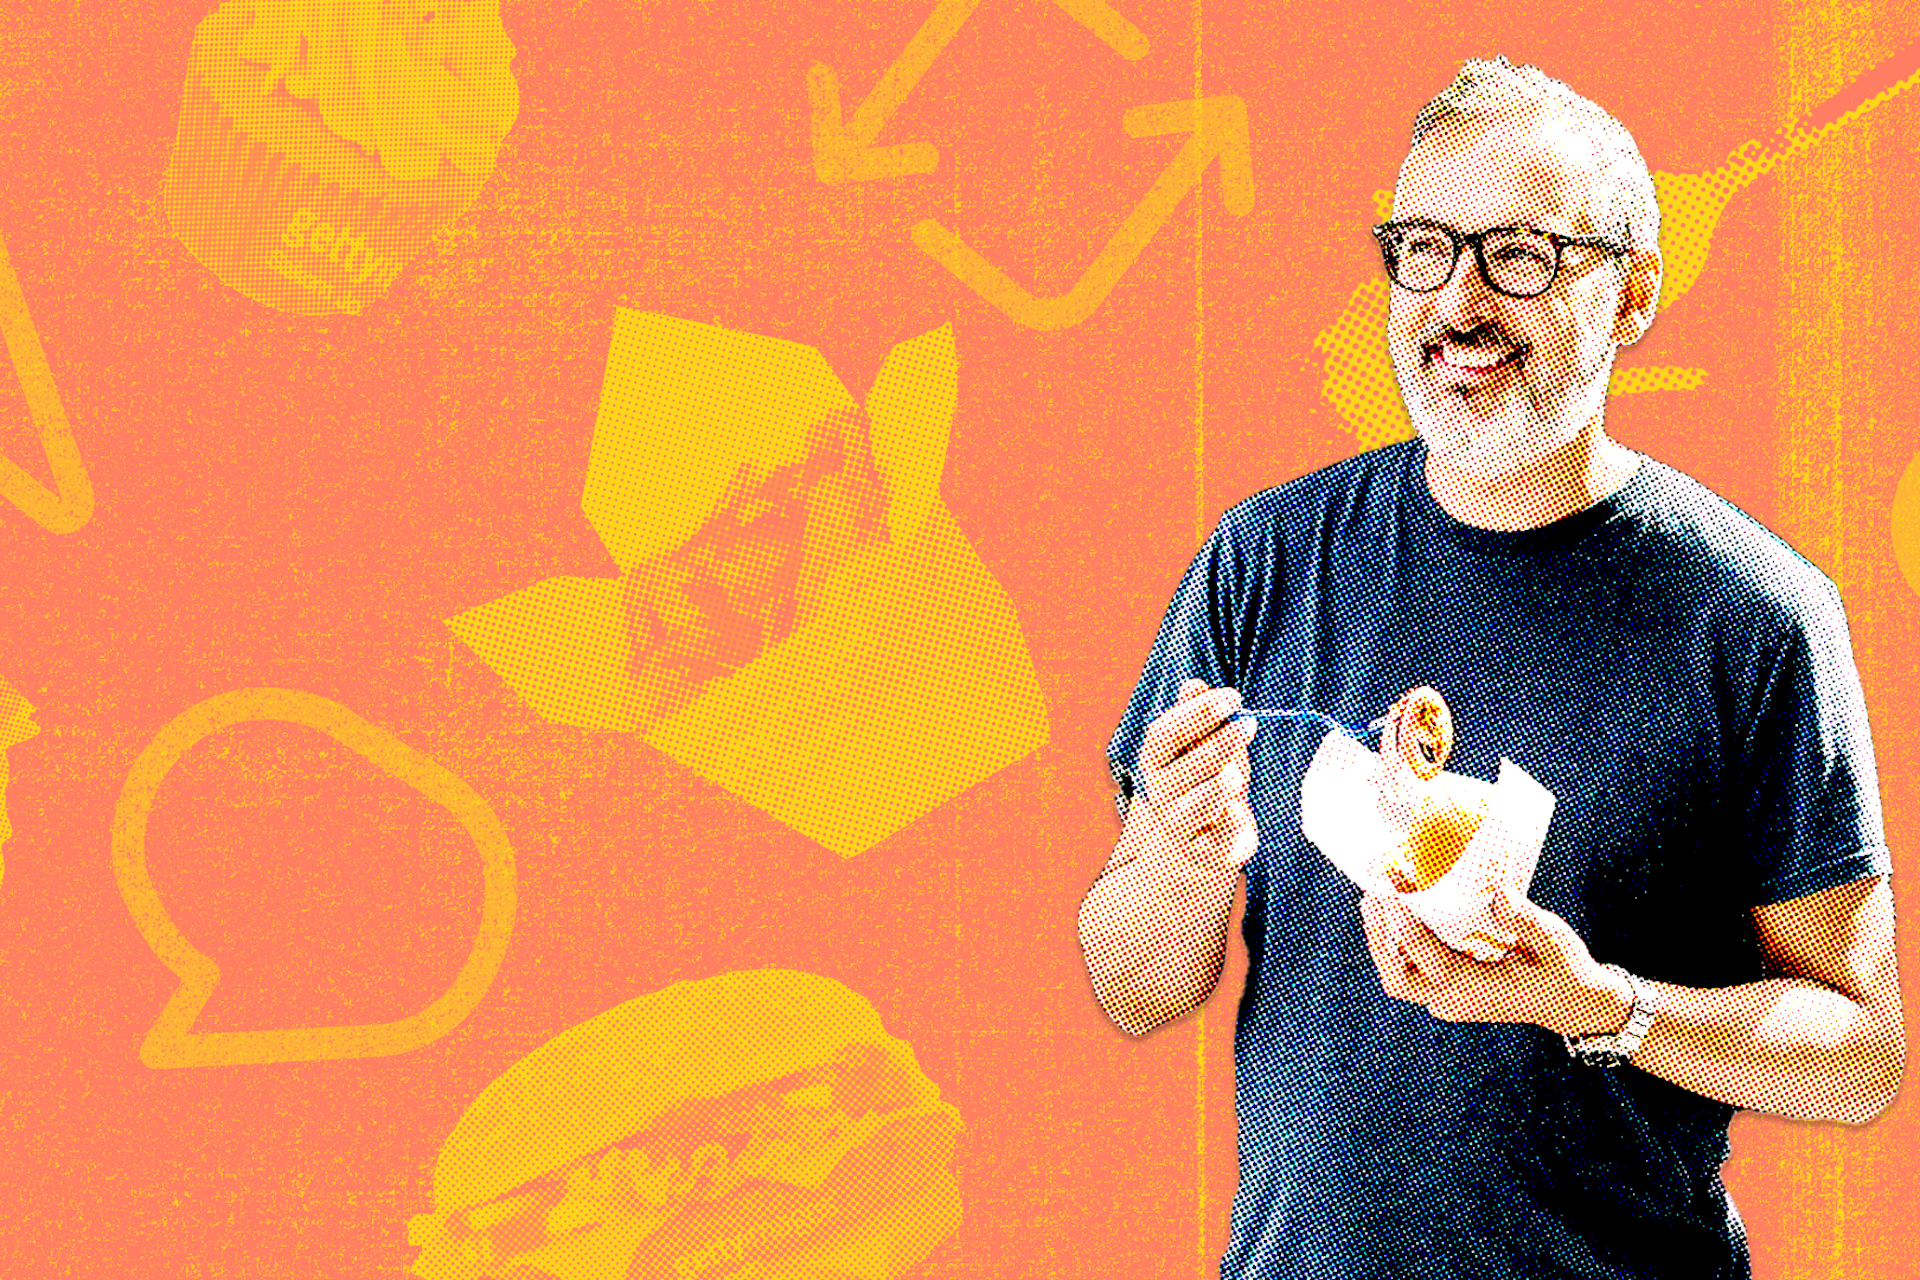 A man eating take out from a paper cone against a bright orange background.